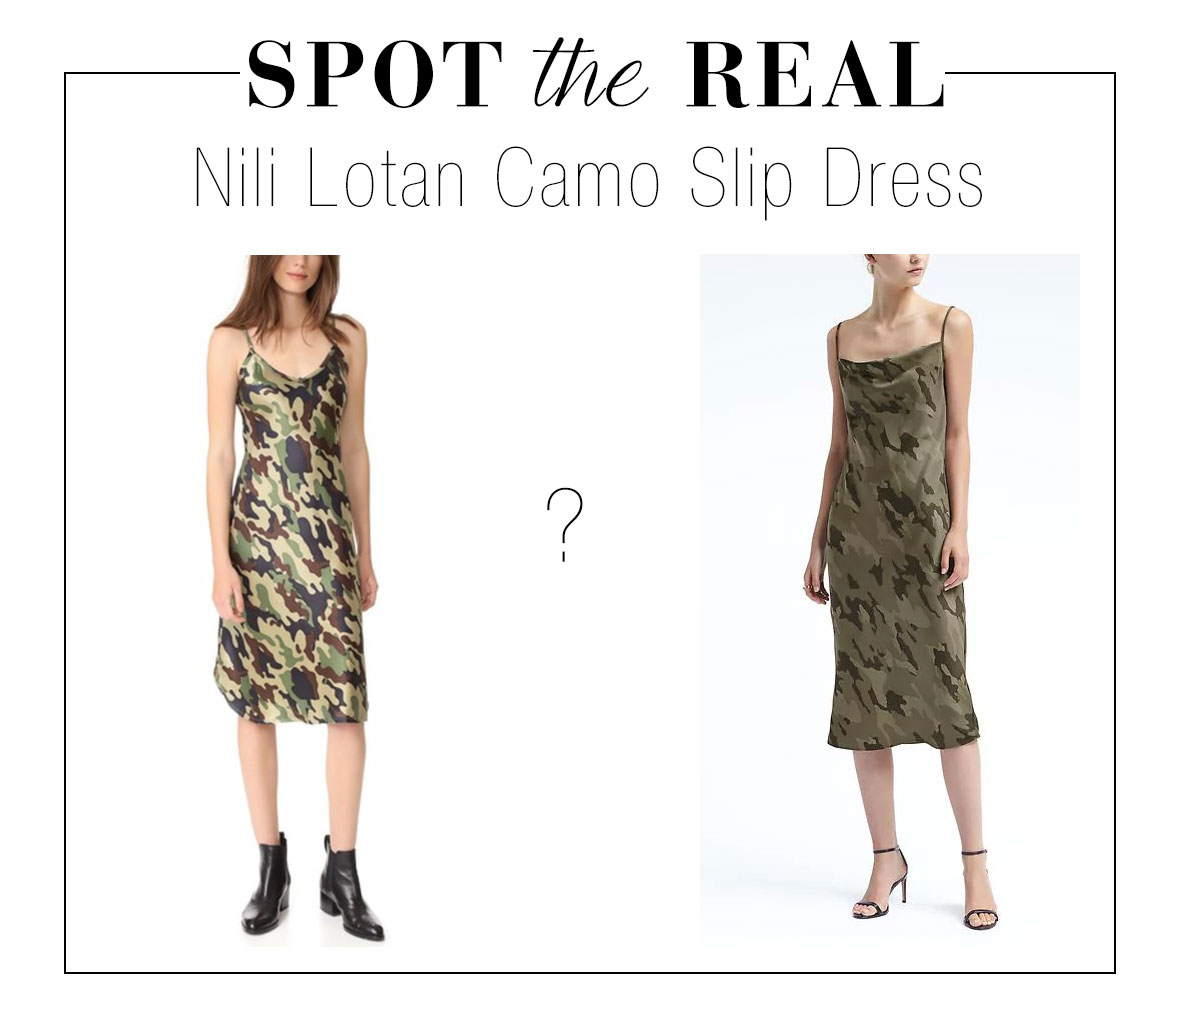 Can you guess which is the real Nili Lotan camo slip dress?